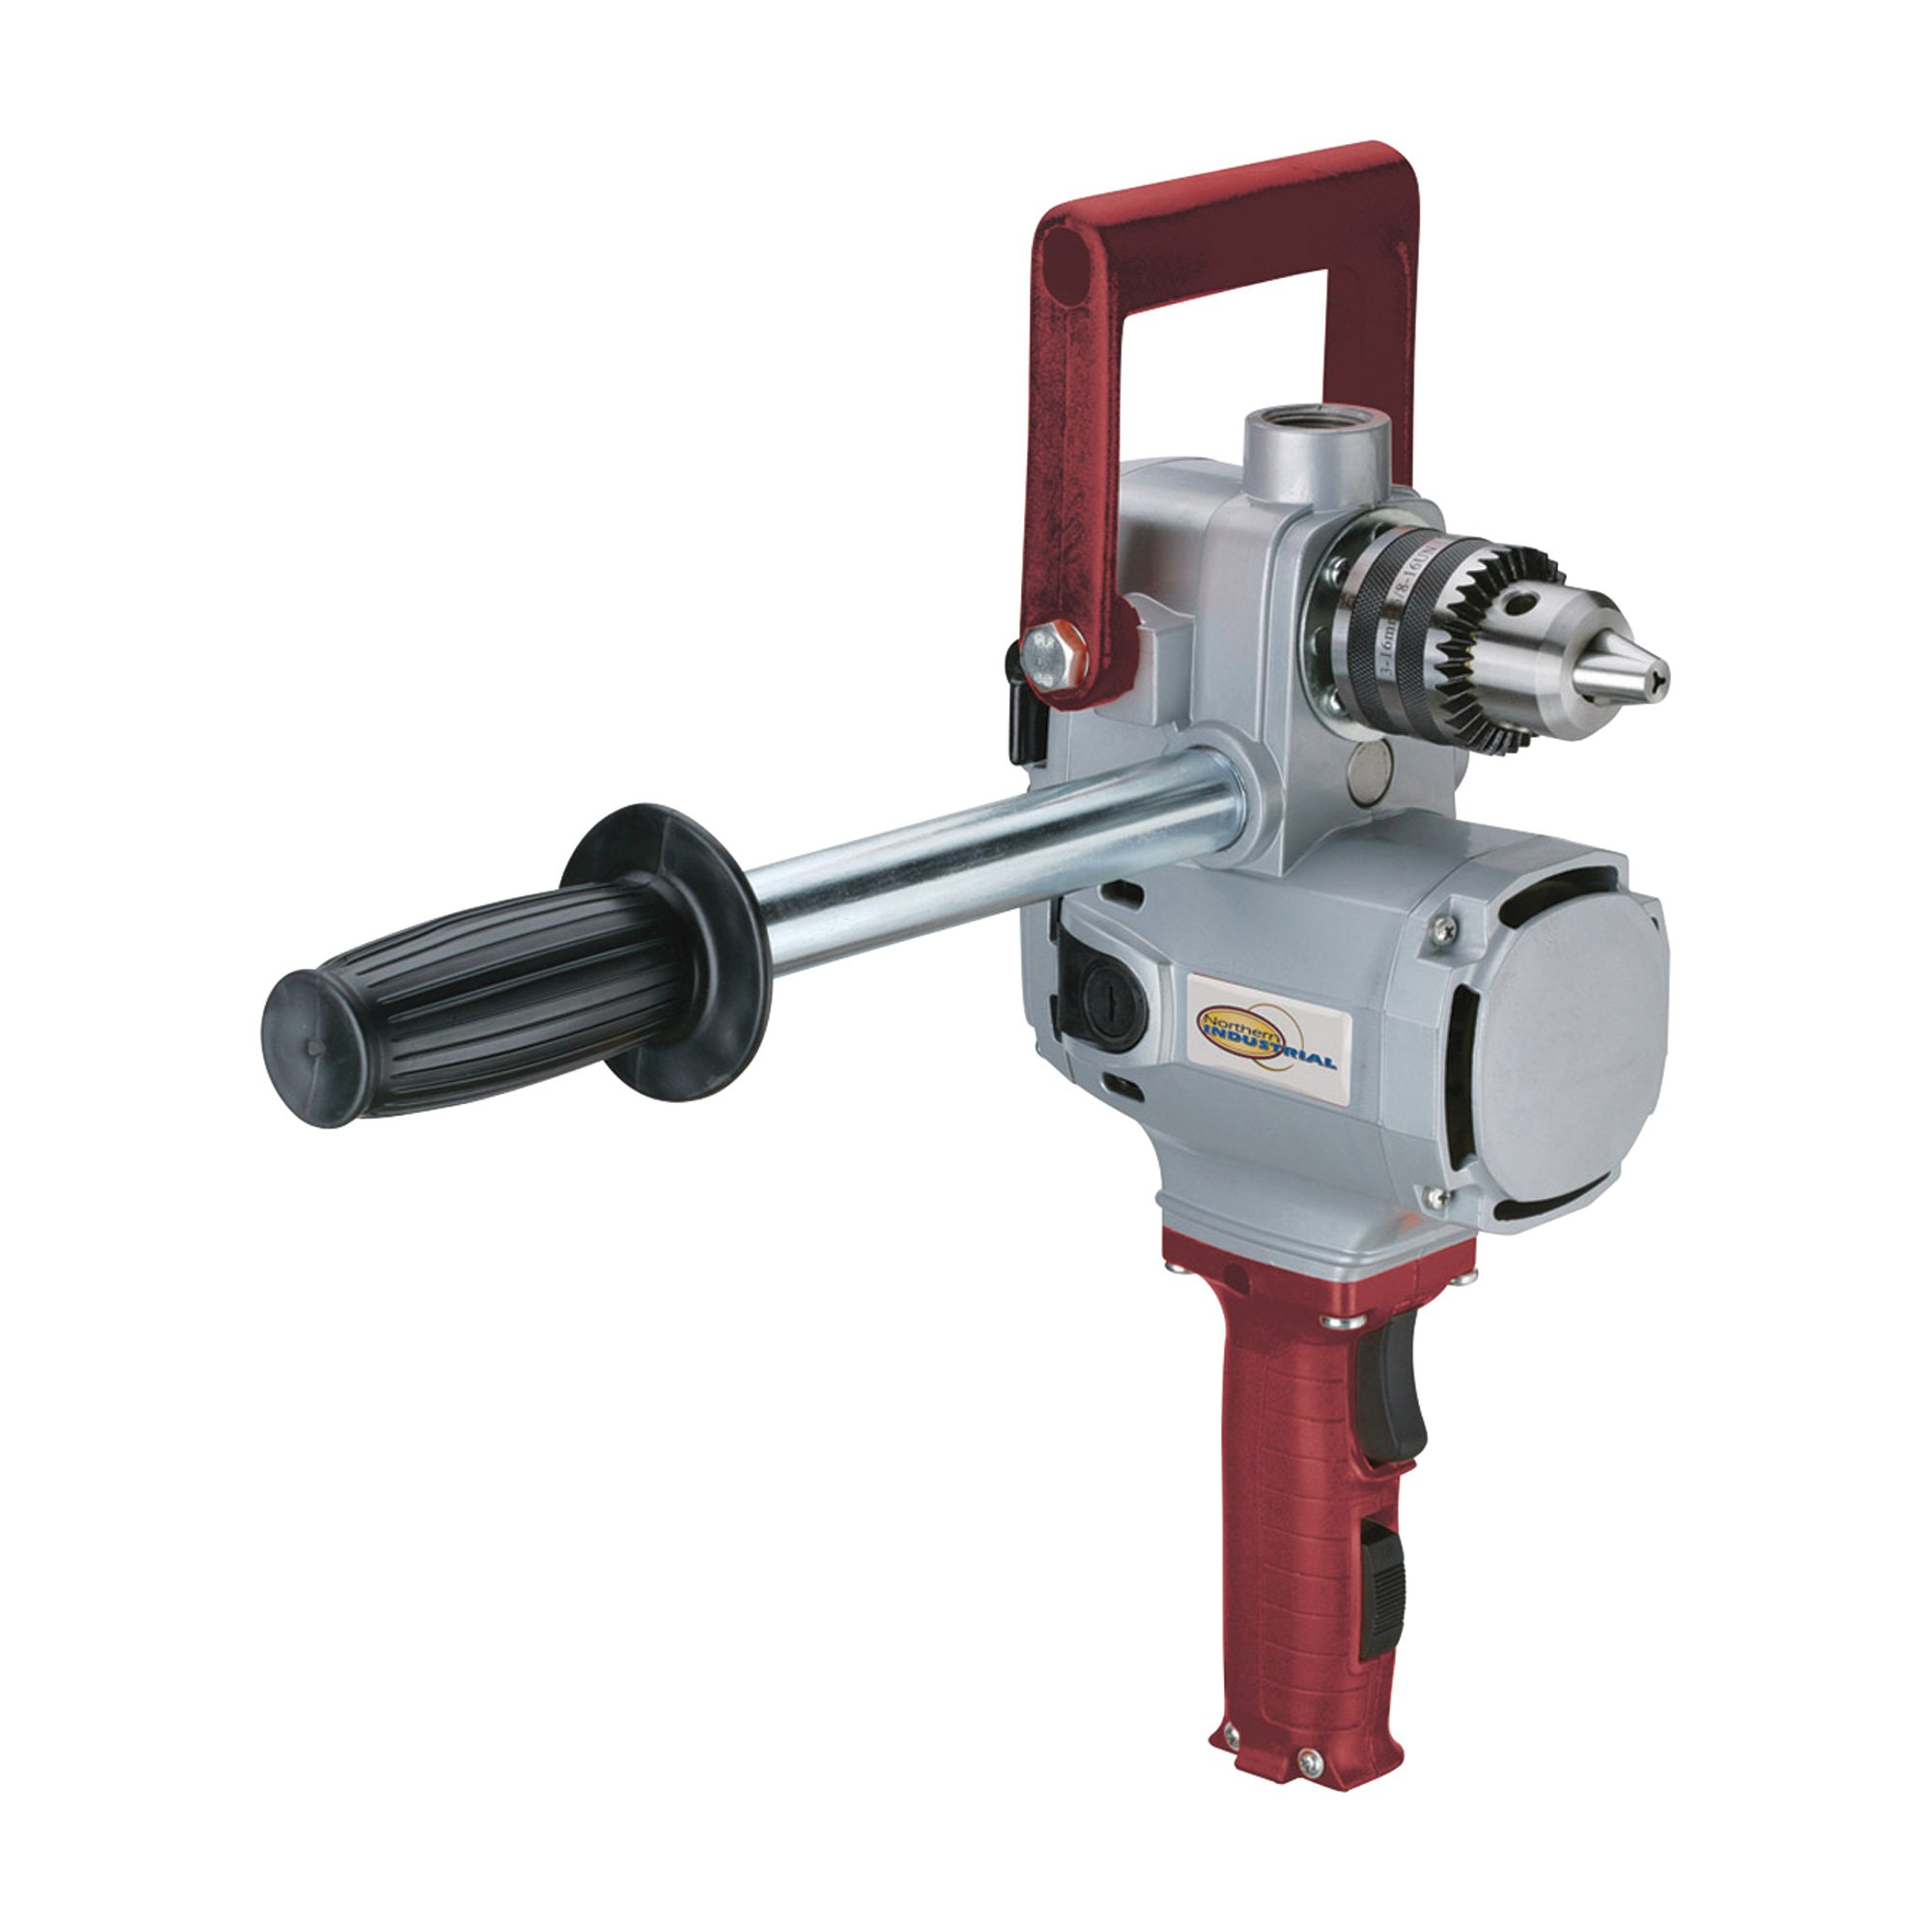 Northern Industrial Compact Right Angle Drill